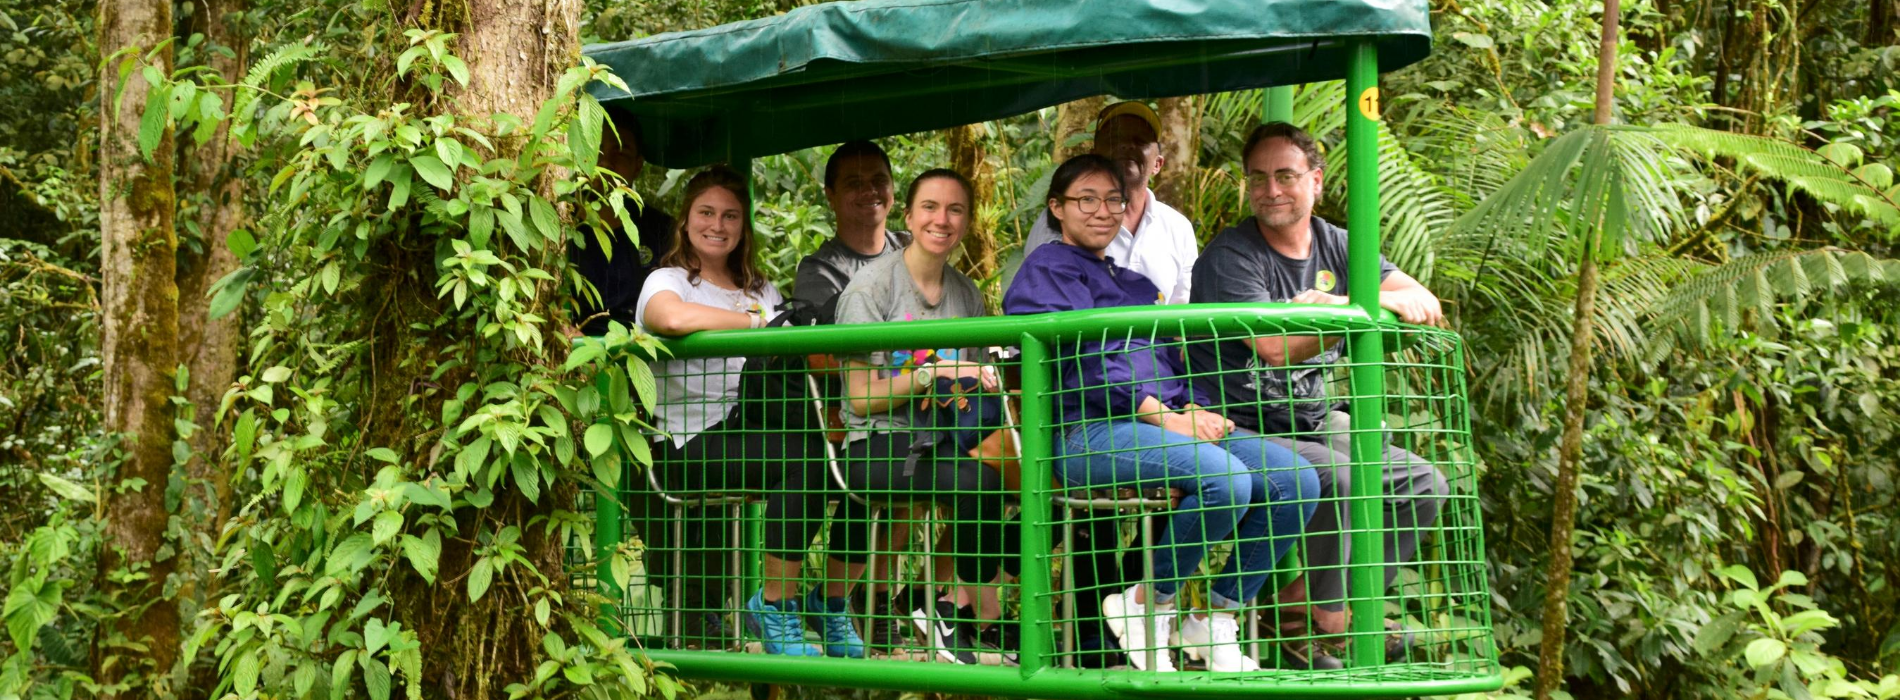 A group of students and faculty sit on a traveling cart in the rainforest. They are smiling at the camera.